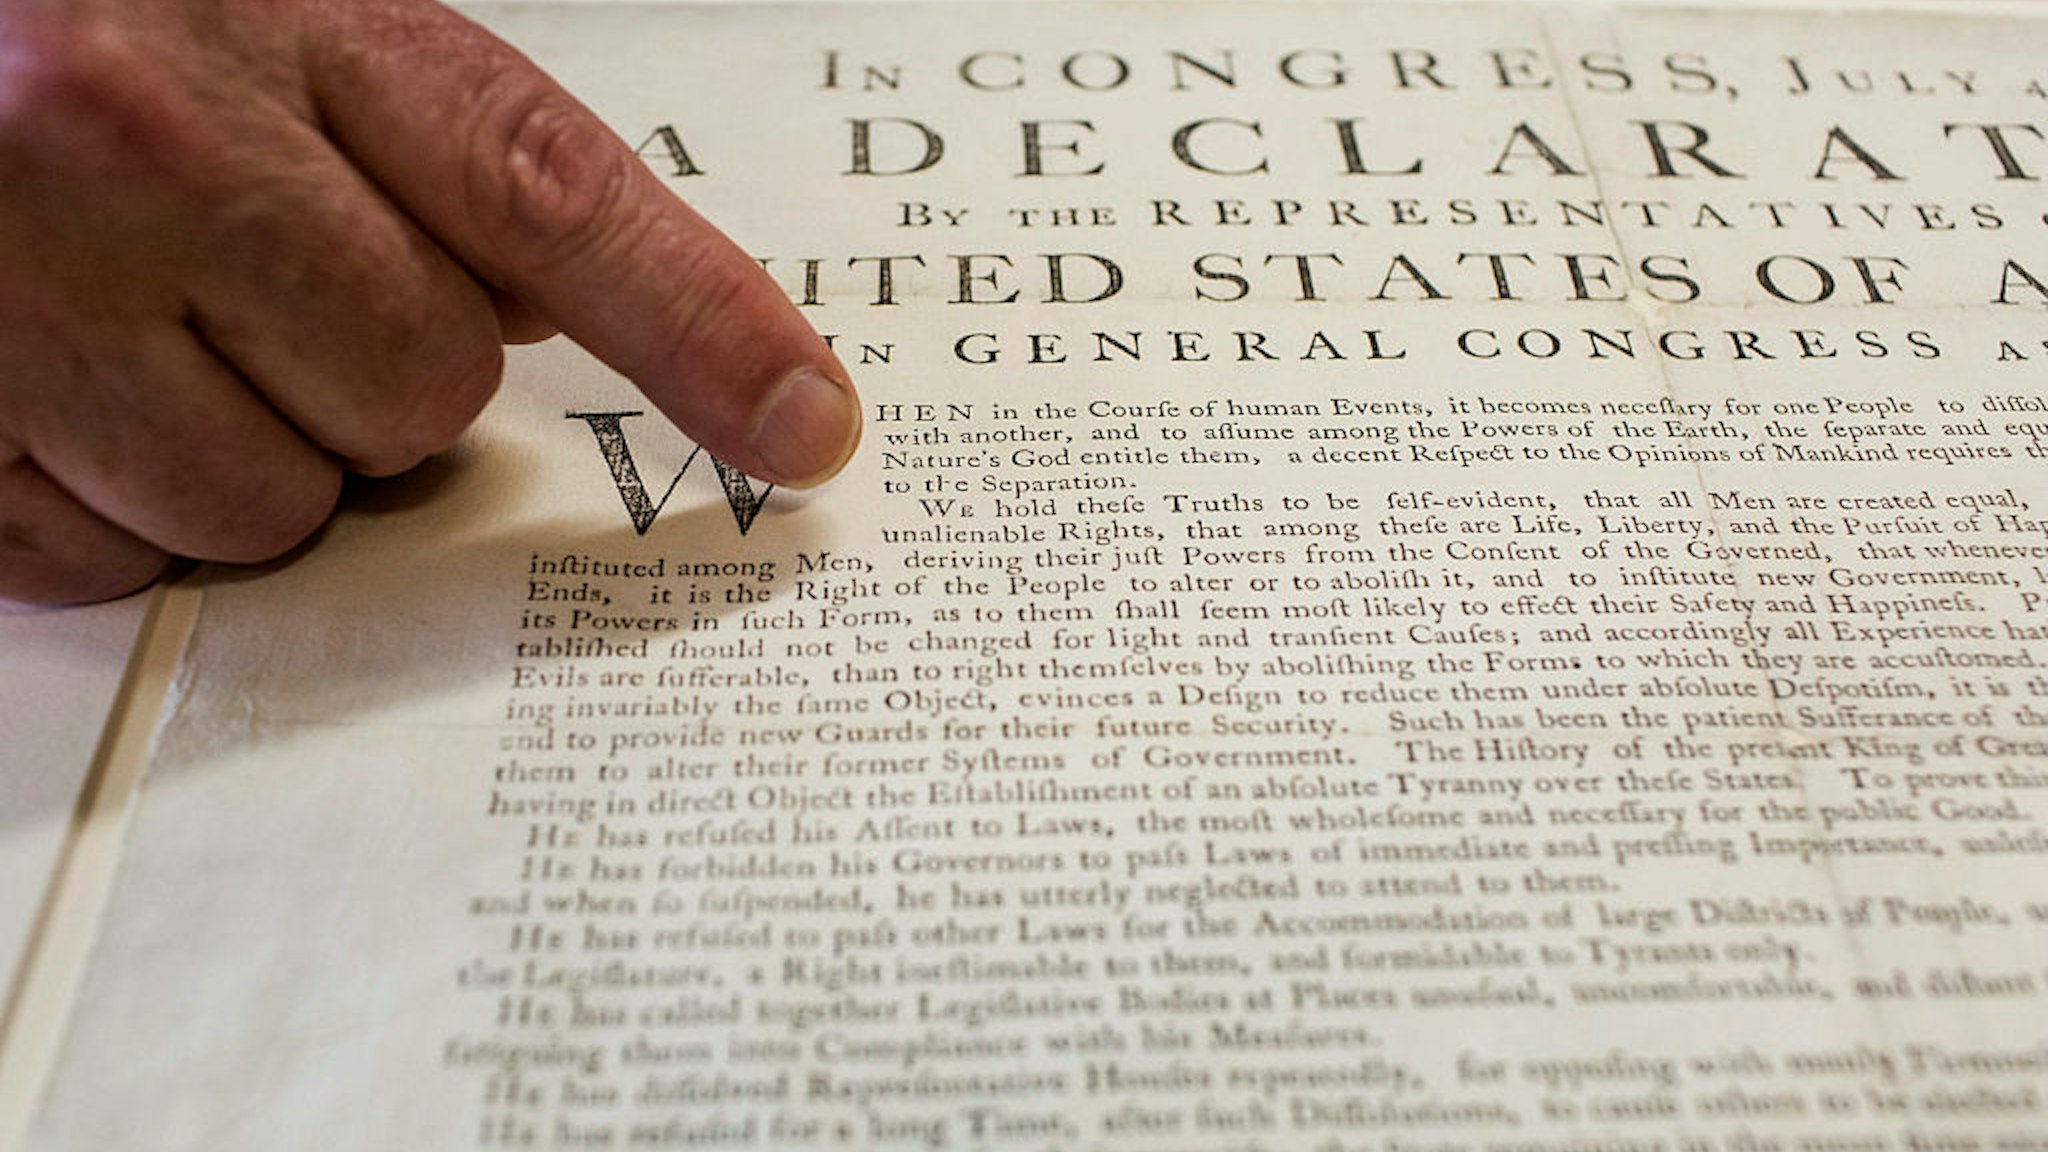 Peter Drummey, chief reference librarian of the Massachusetts Historical Society, points to a rare copy of the Declaration of Independence, known as a "Dunlap Broadside," at the society in Boston, Massachusetts, U.S., on Monday, June 29, 2015. Here in acid-free, low humidity stacks are 13 million pages of the personal letters and diaries of men and women who helped create the world we live in. Photographer: Shiho Fukada/Bloomberg via Getty Images